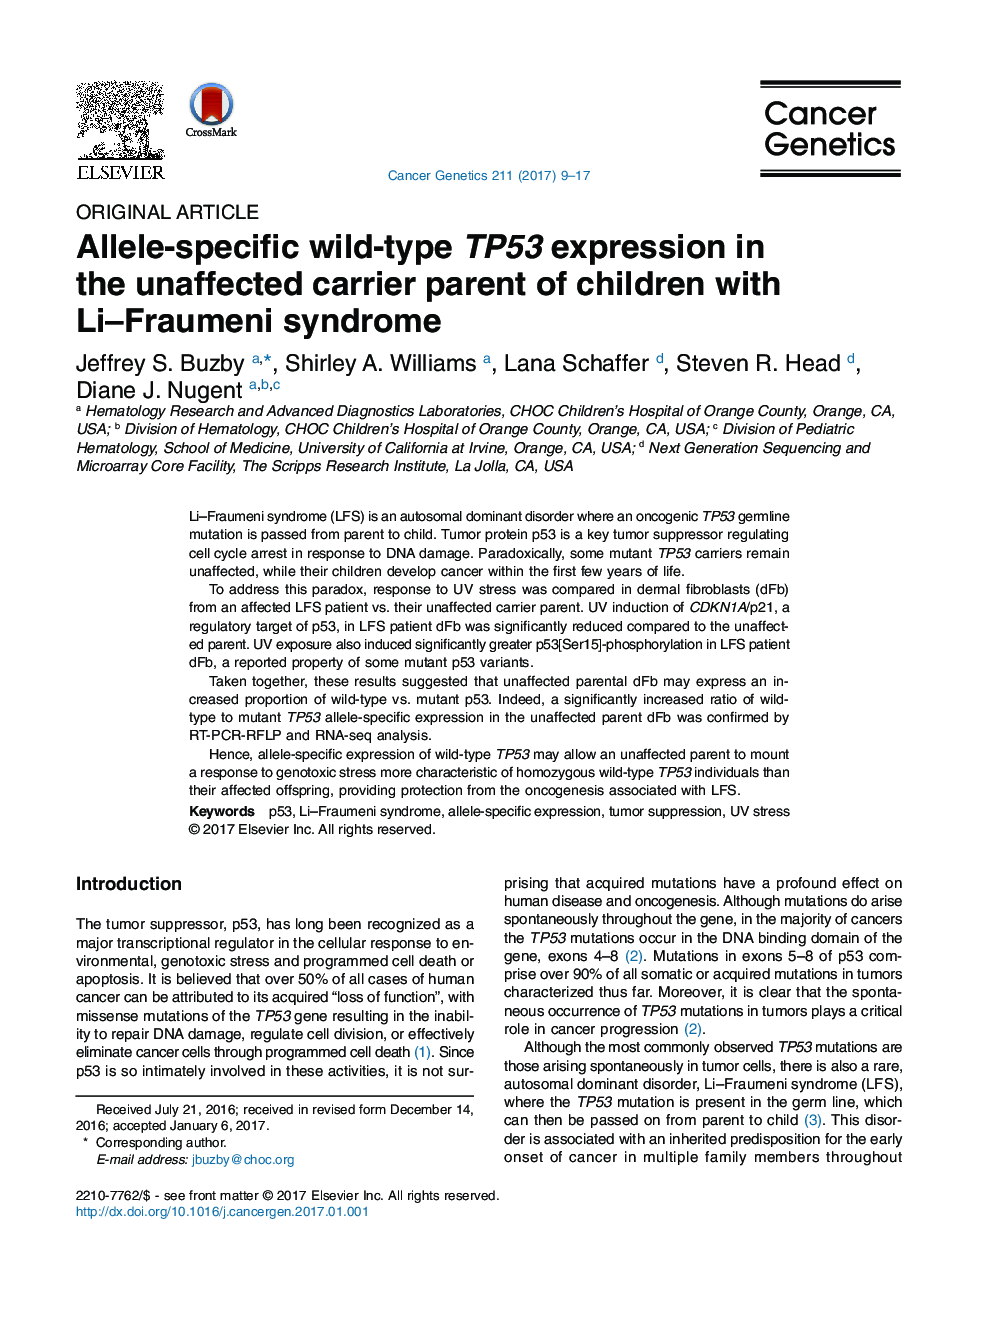 Original ArticleAllele-specific wild-type TP53 expression in the unaffected carrier parent of children with Li-Fraumeni syndrome